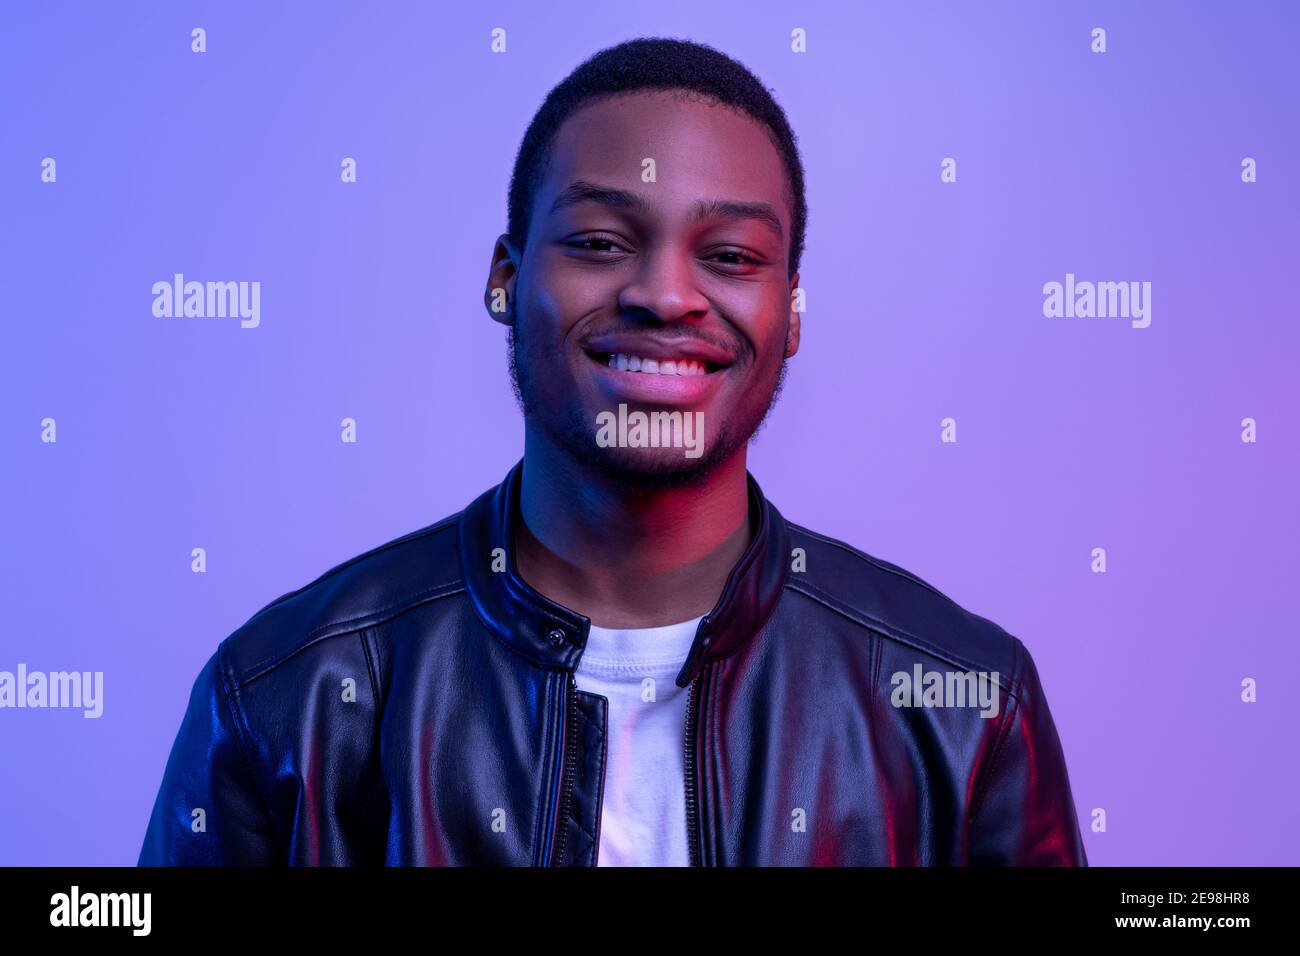 Portraif Of Happy Black Guy Posing In Leather Jacket Under Neon Light Stock Photo